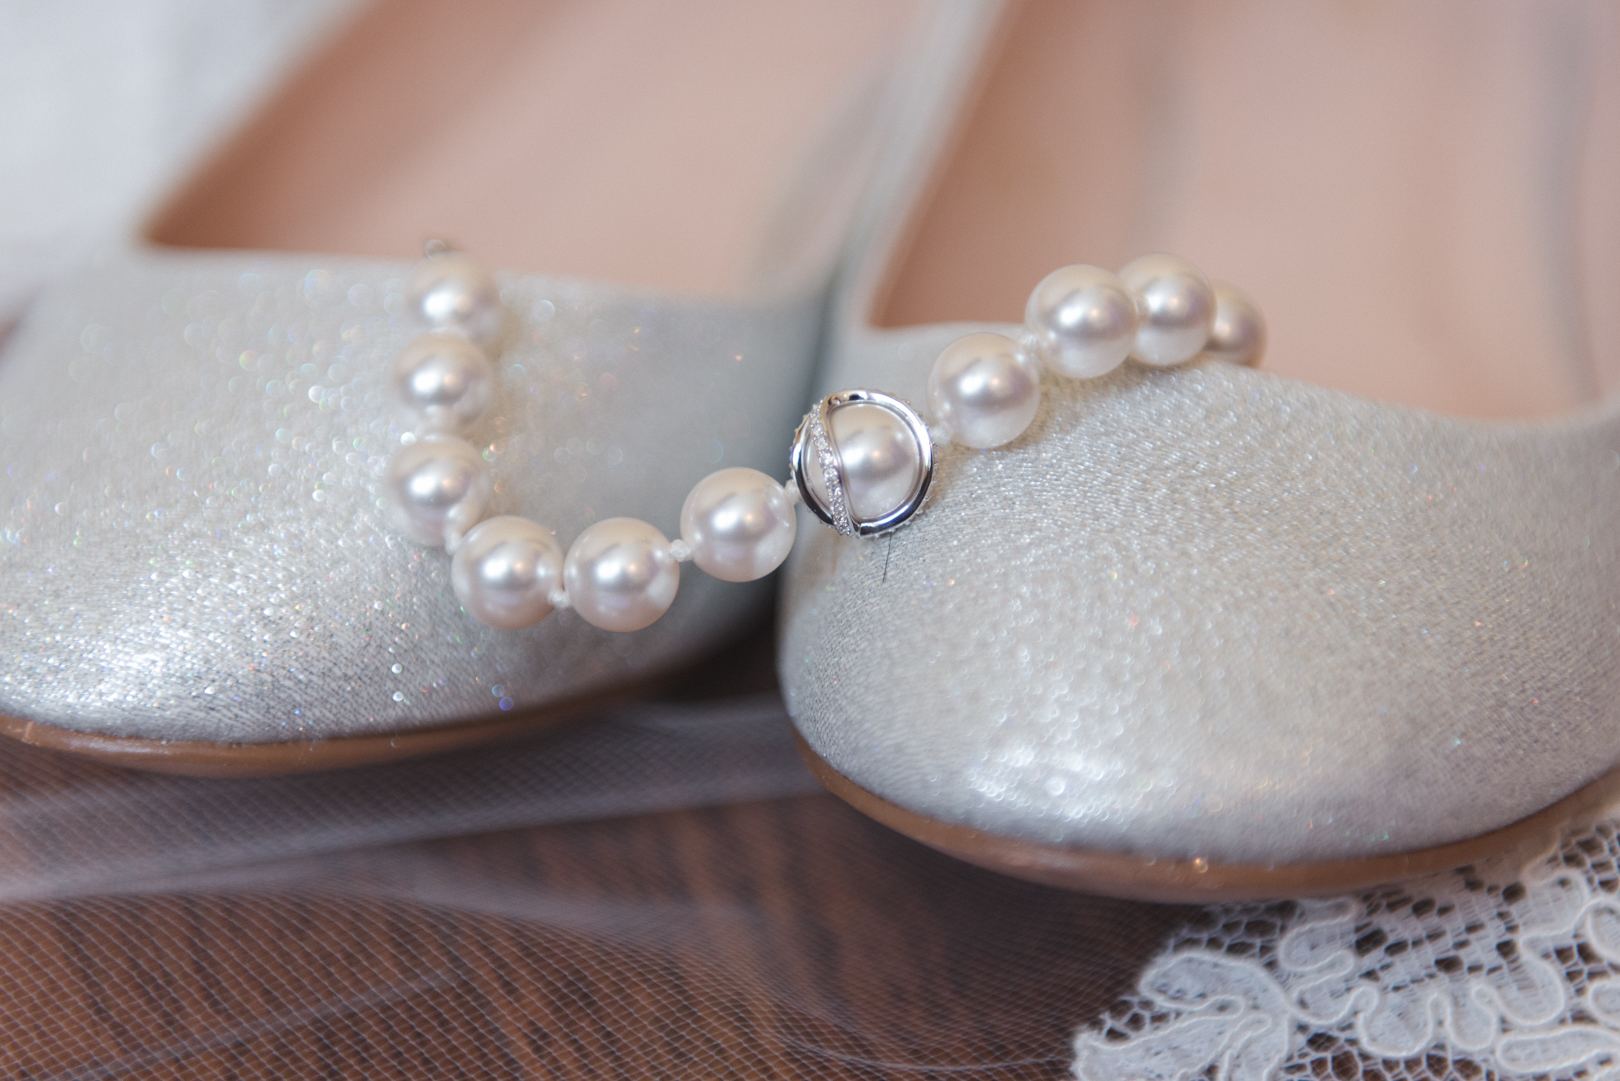 pearl necklace draped over bride's wedding shoes